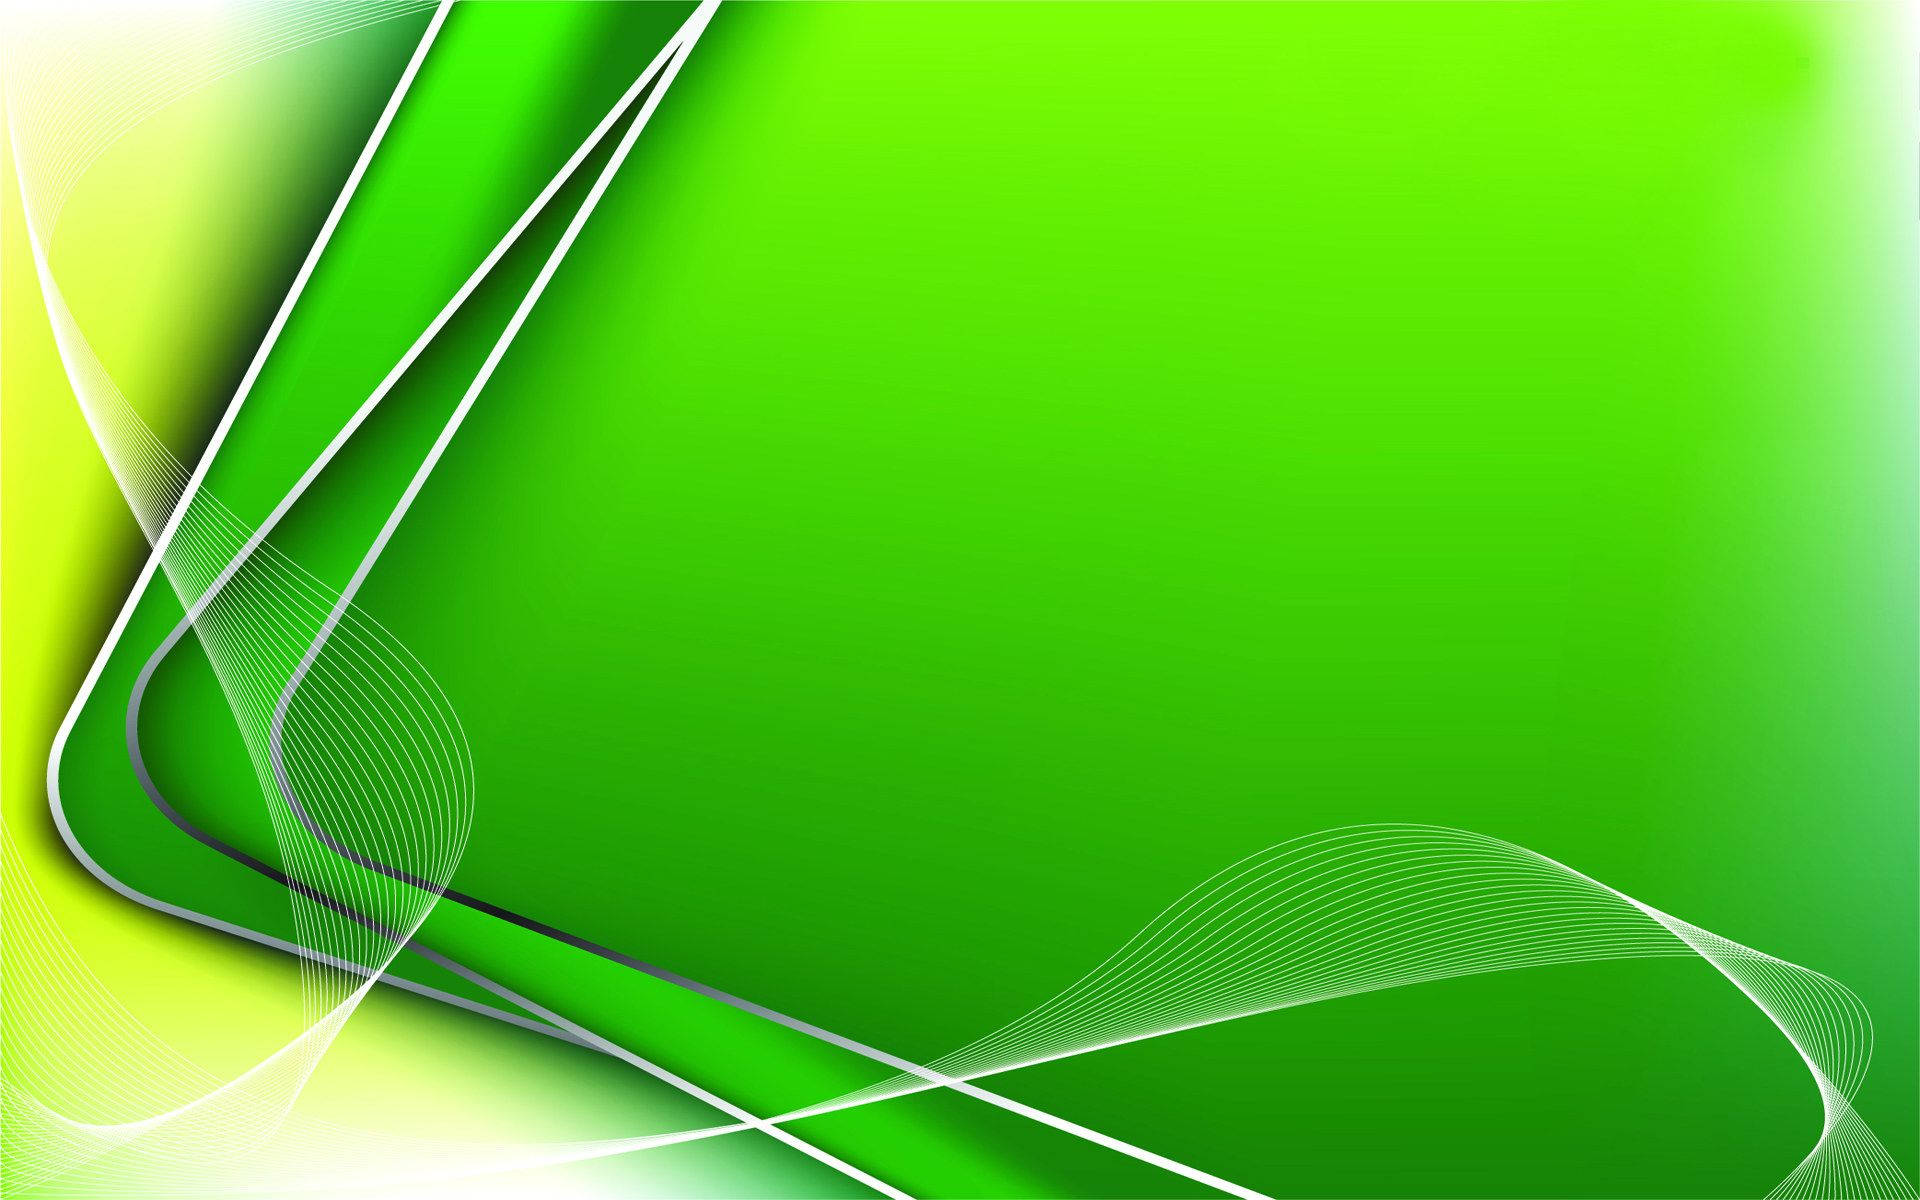 Bending Green Abstract Lines Background